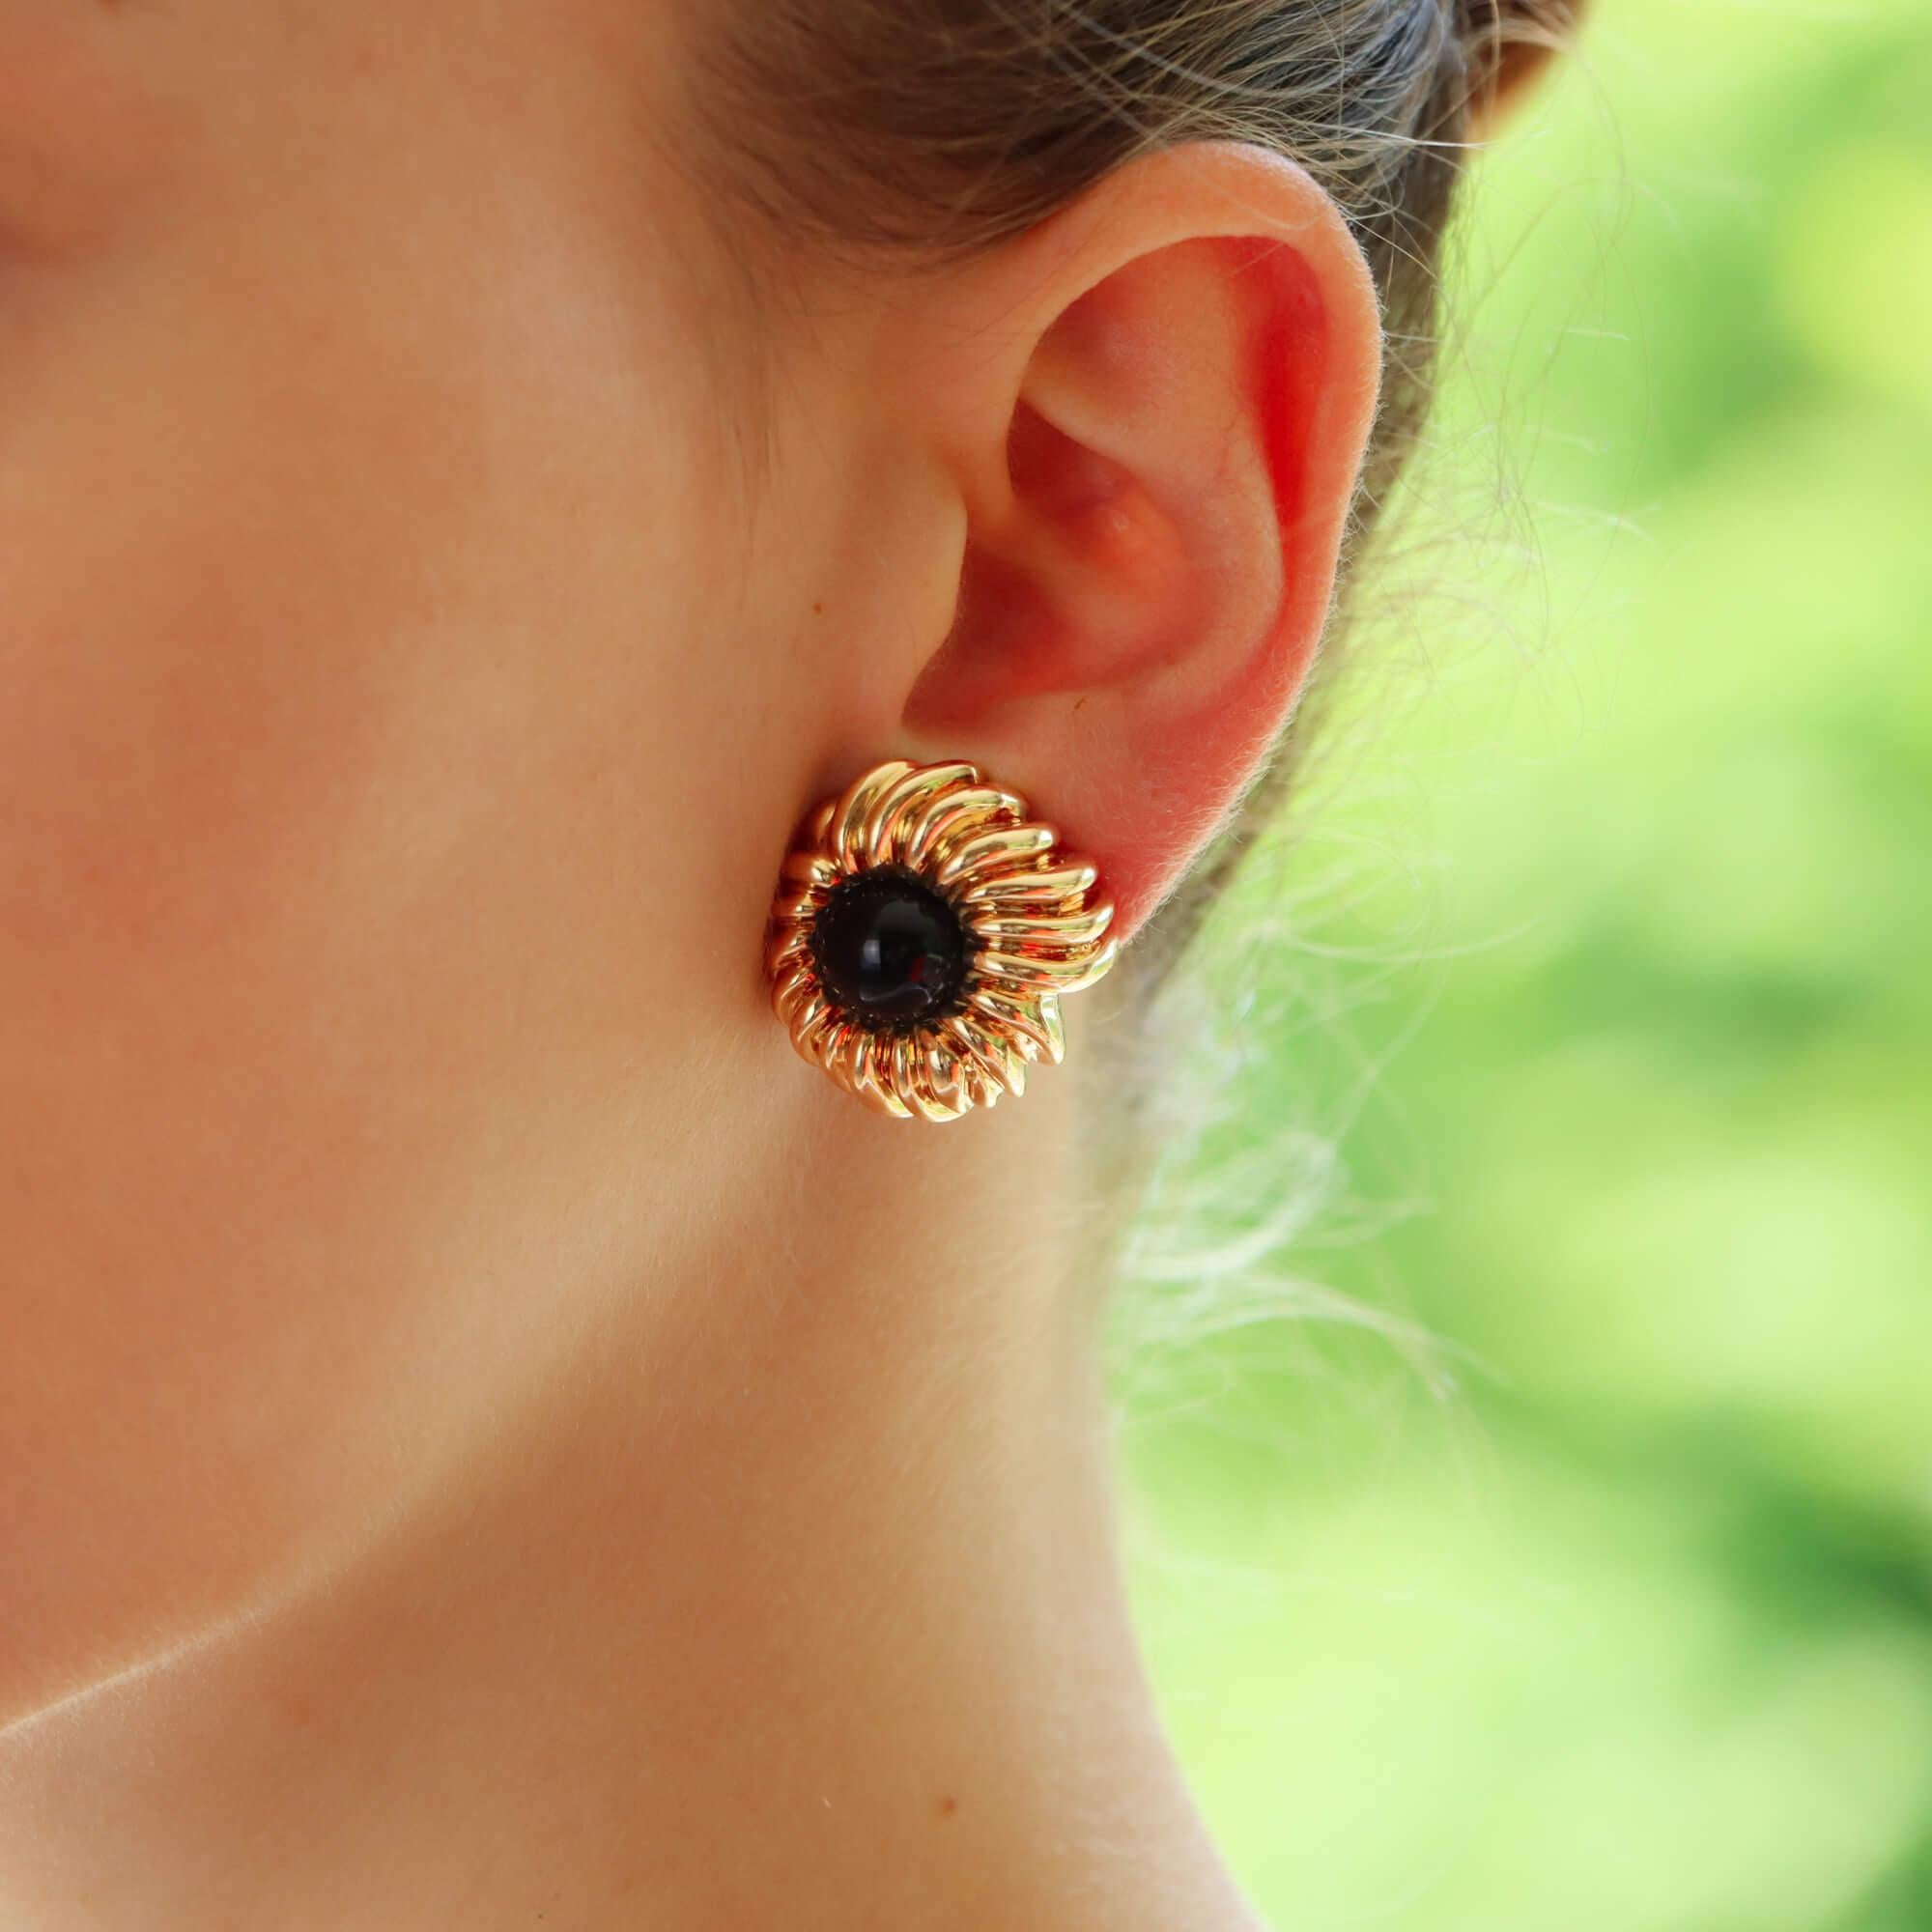 A highly unique pair of vintage Tiffany & Co. onyx flower earrings set in 18k yellow gold.

Each earring is composed of a stylish abstract floral motif. The petals of the flowers are designed to drape down the lobe elegantly and they are each